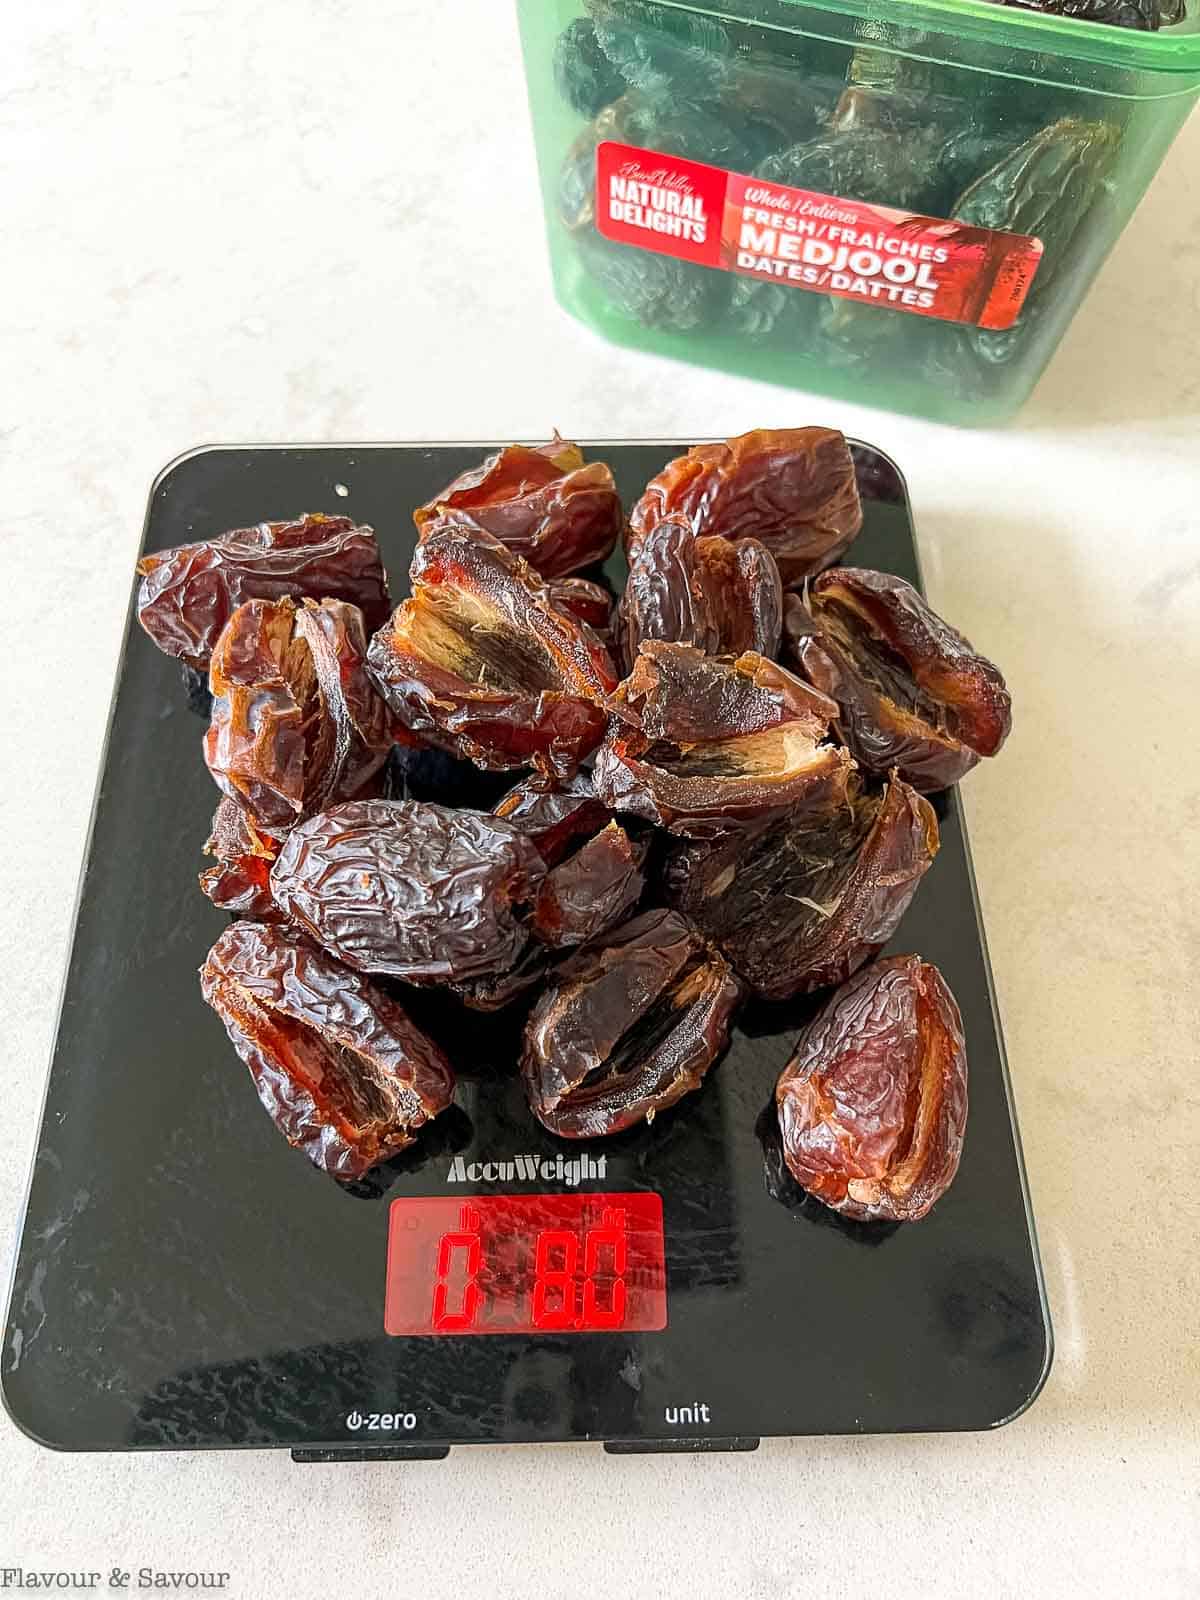 8 ounces of Medjool dates is approximately 12 to 15 dates once they're pitted.